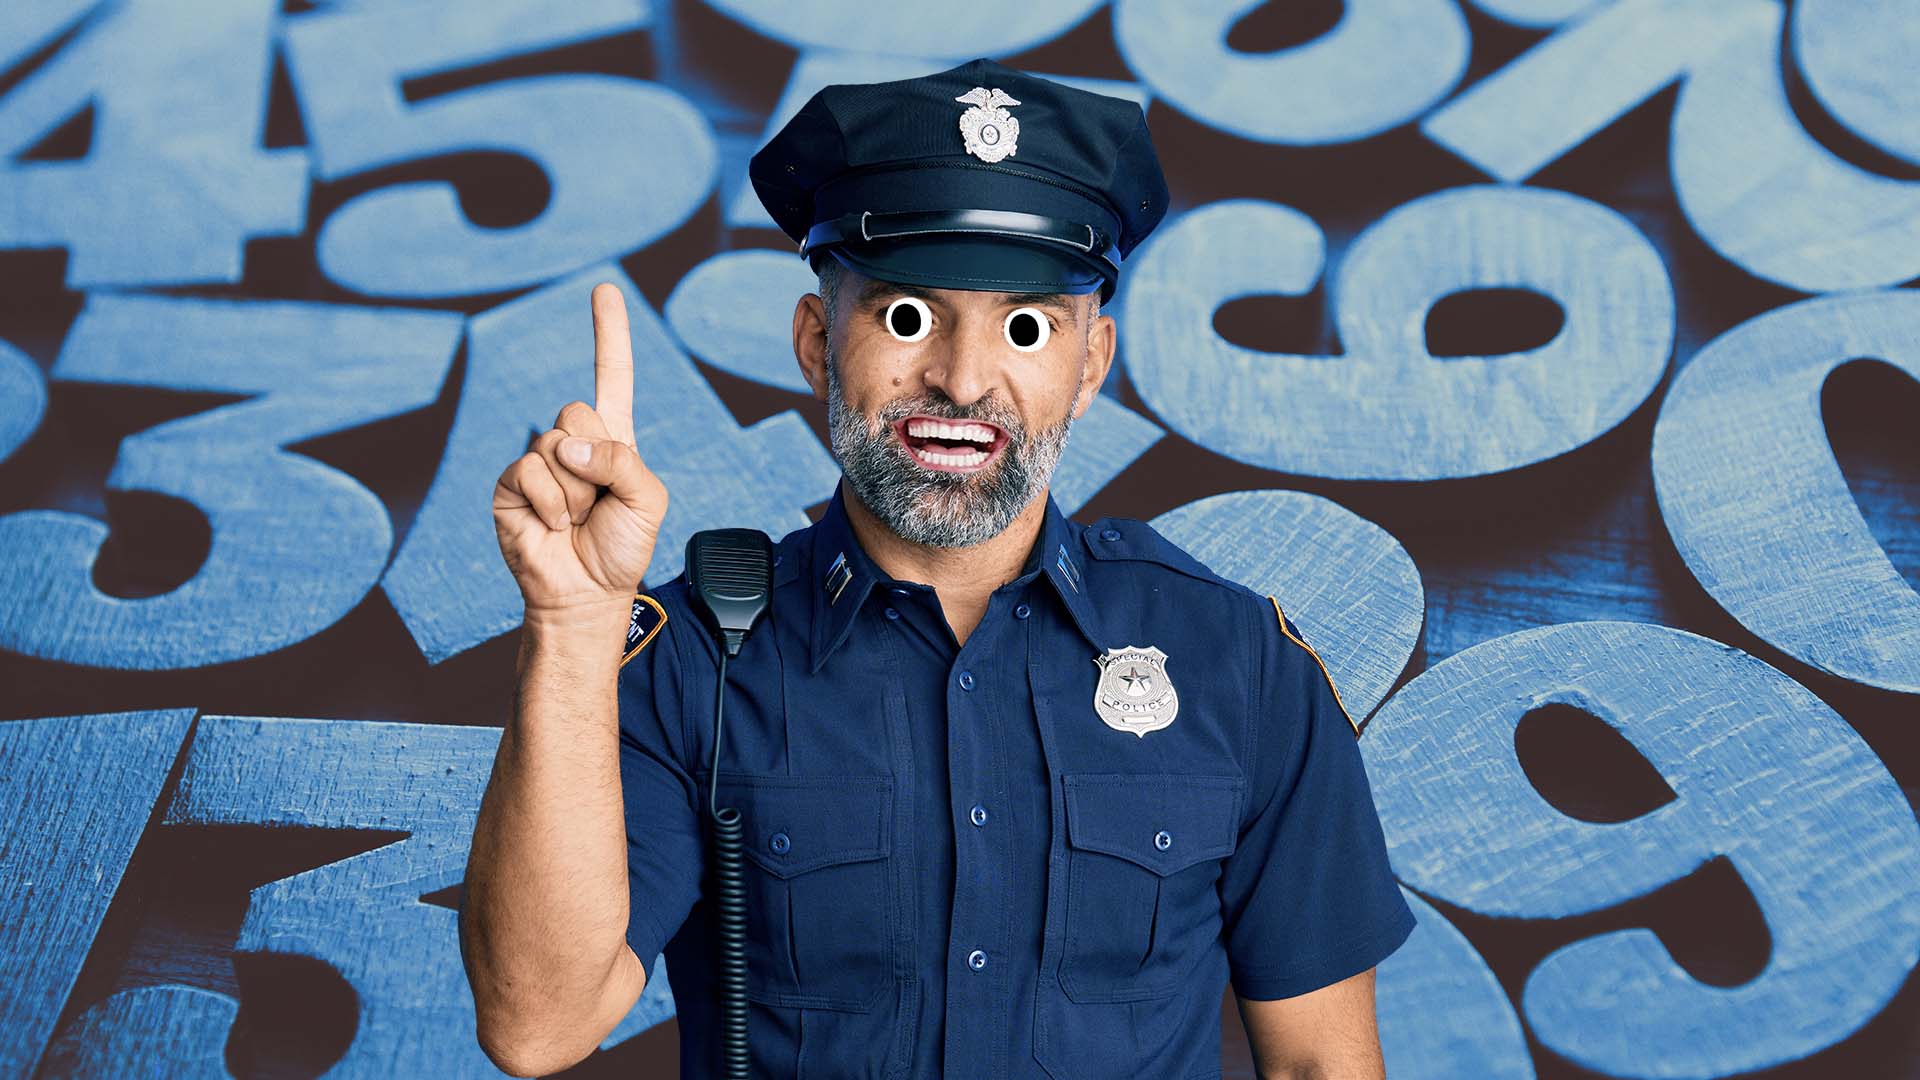 A police officer standing in front of a backdrop of numbers